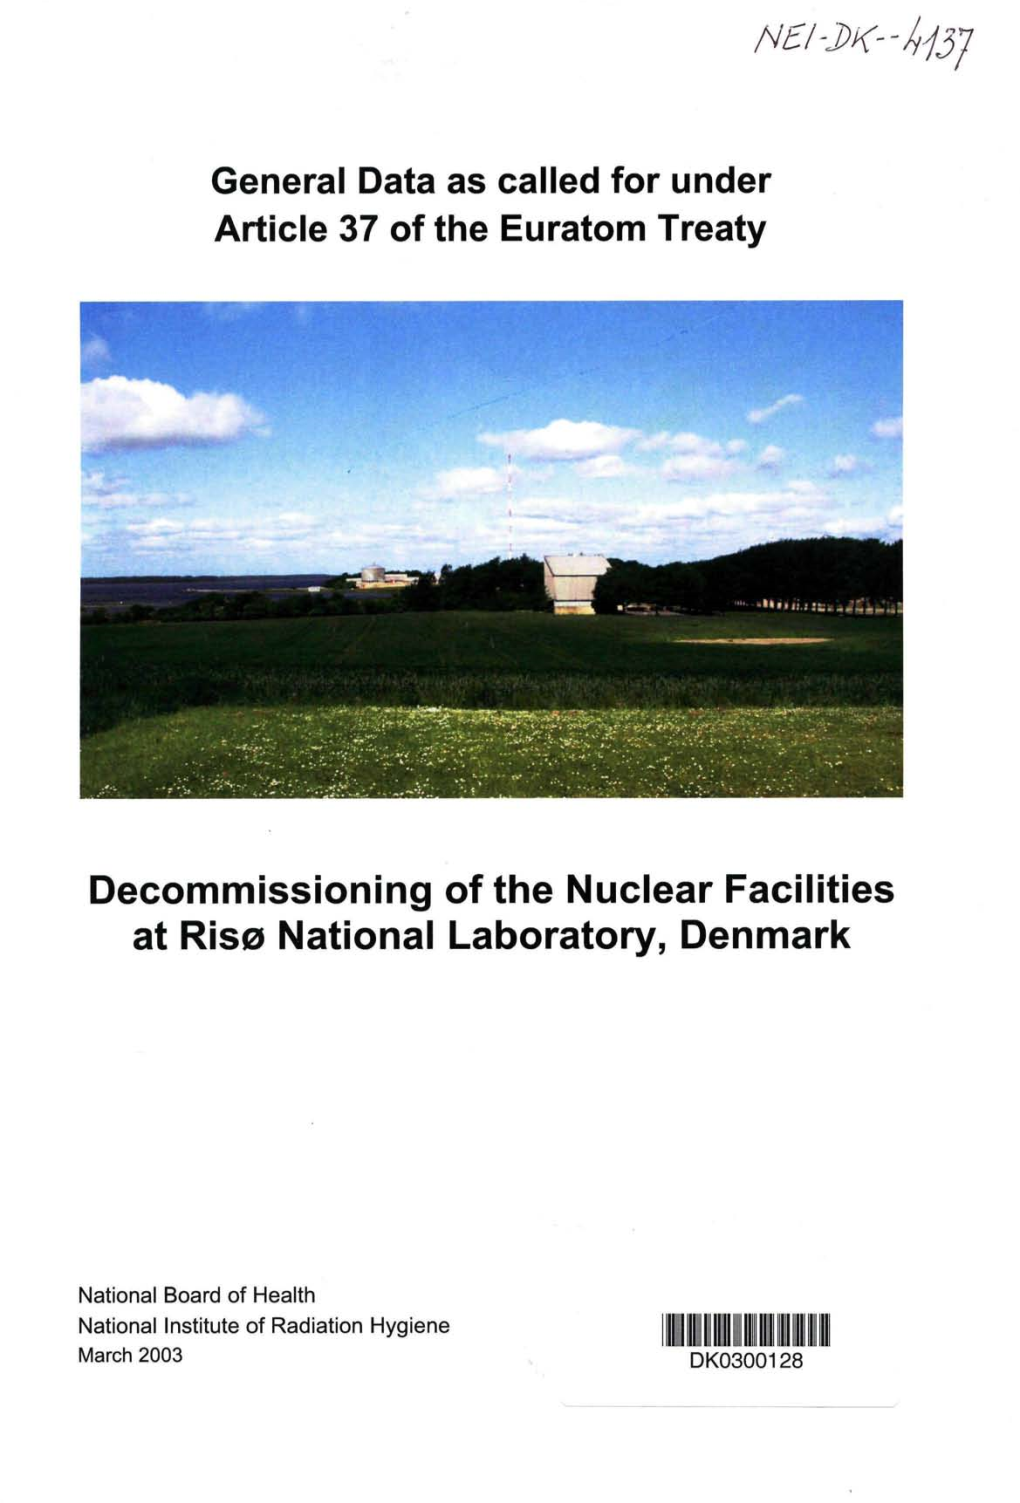 Decommissioning of the Nuclear Facilities at Ris0 National Laboratory, Denmark